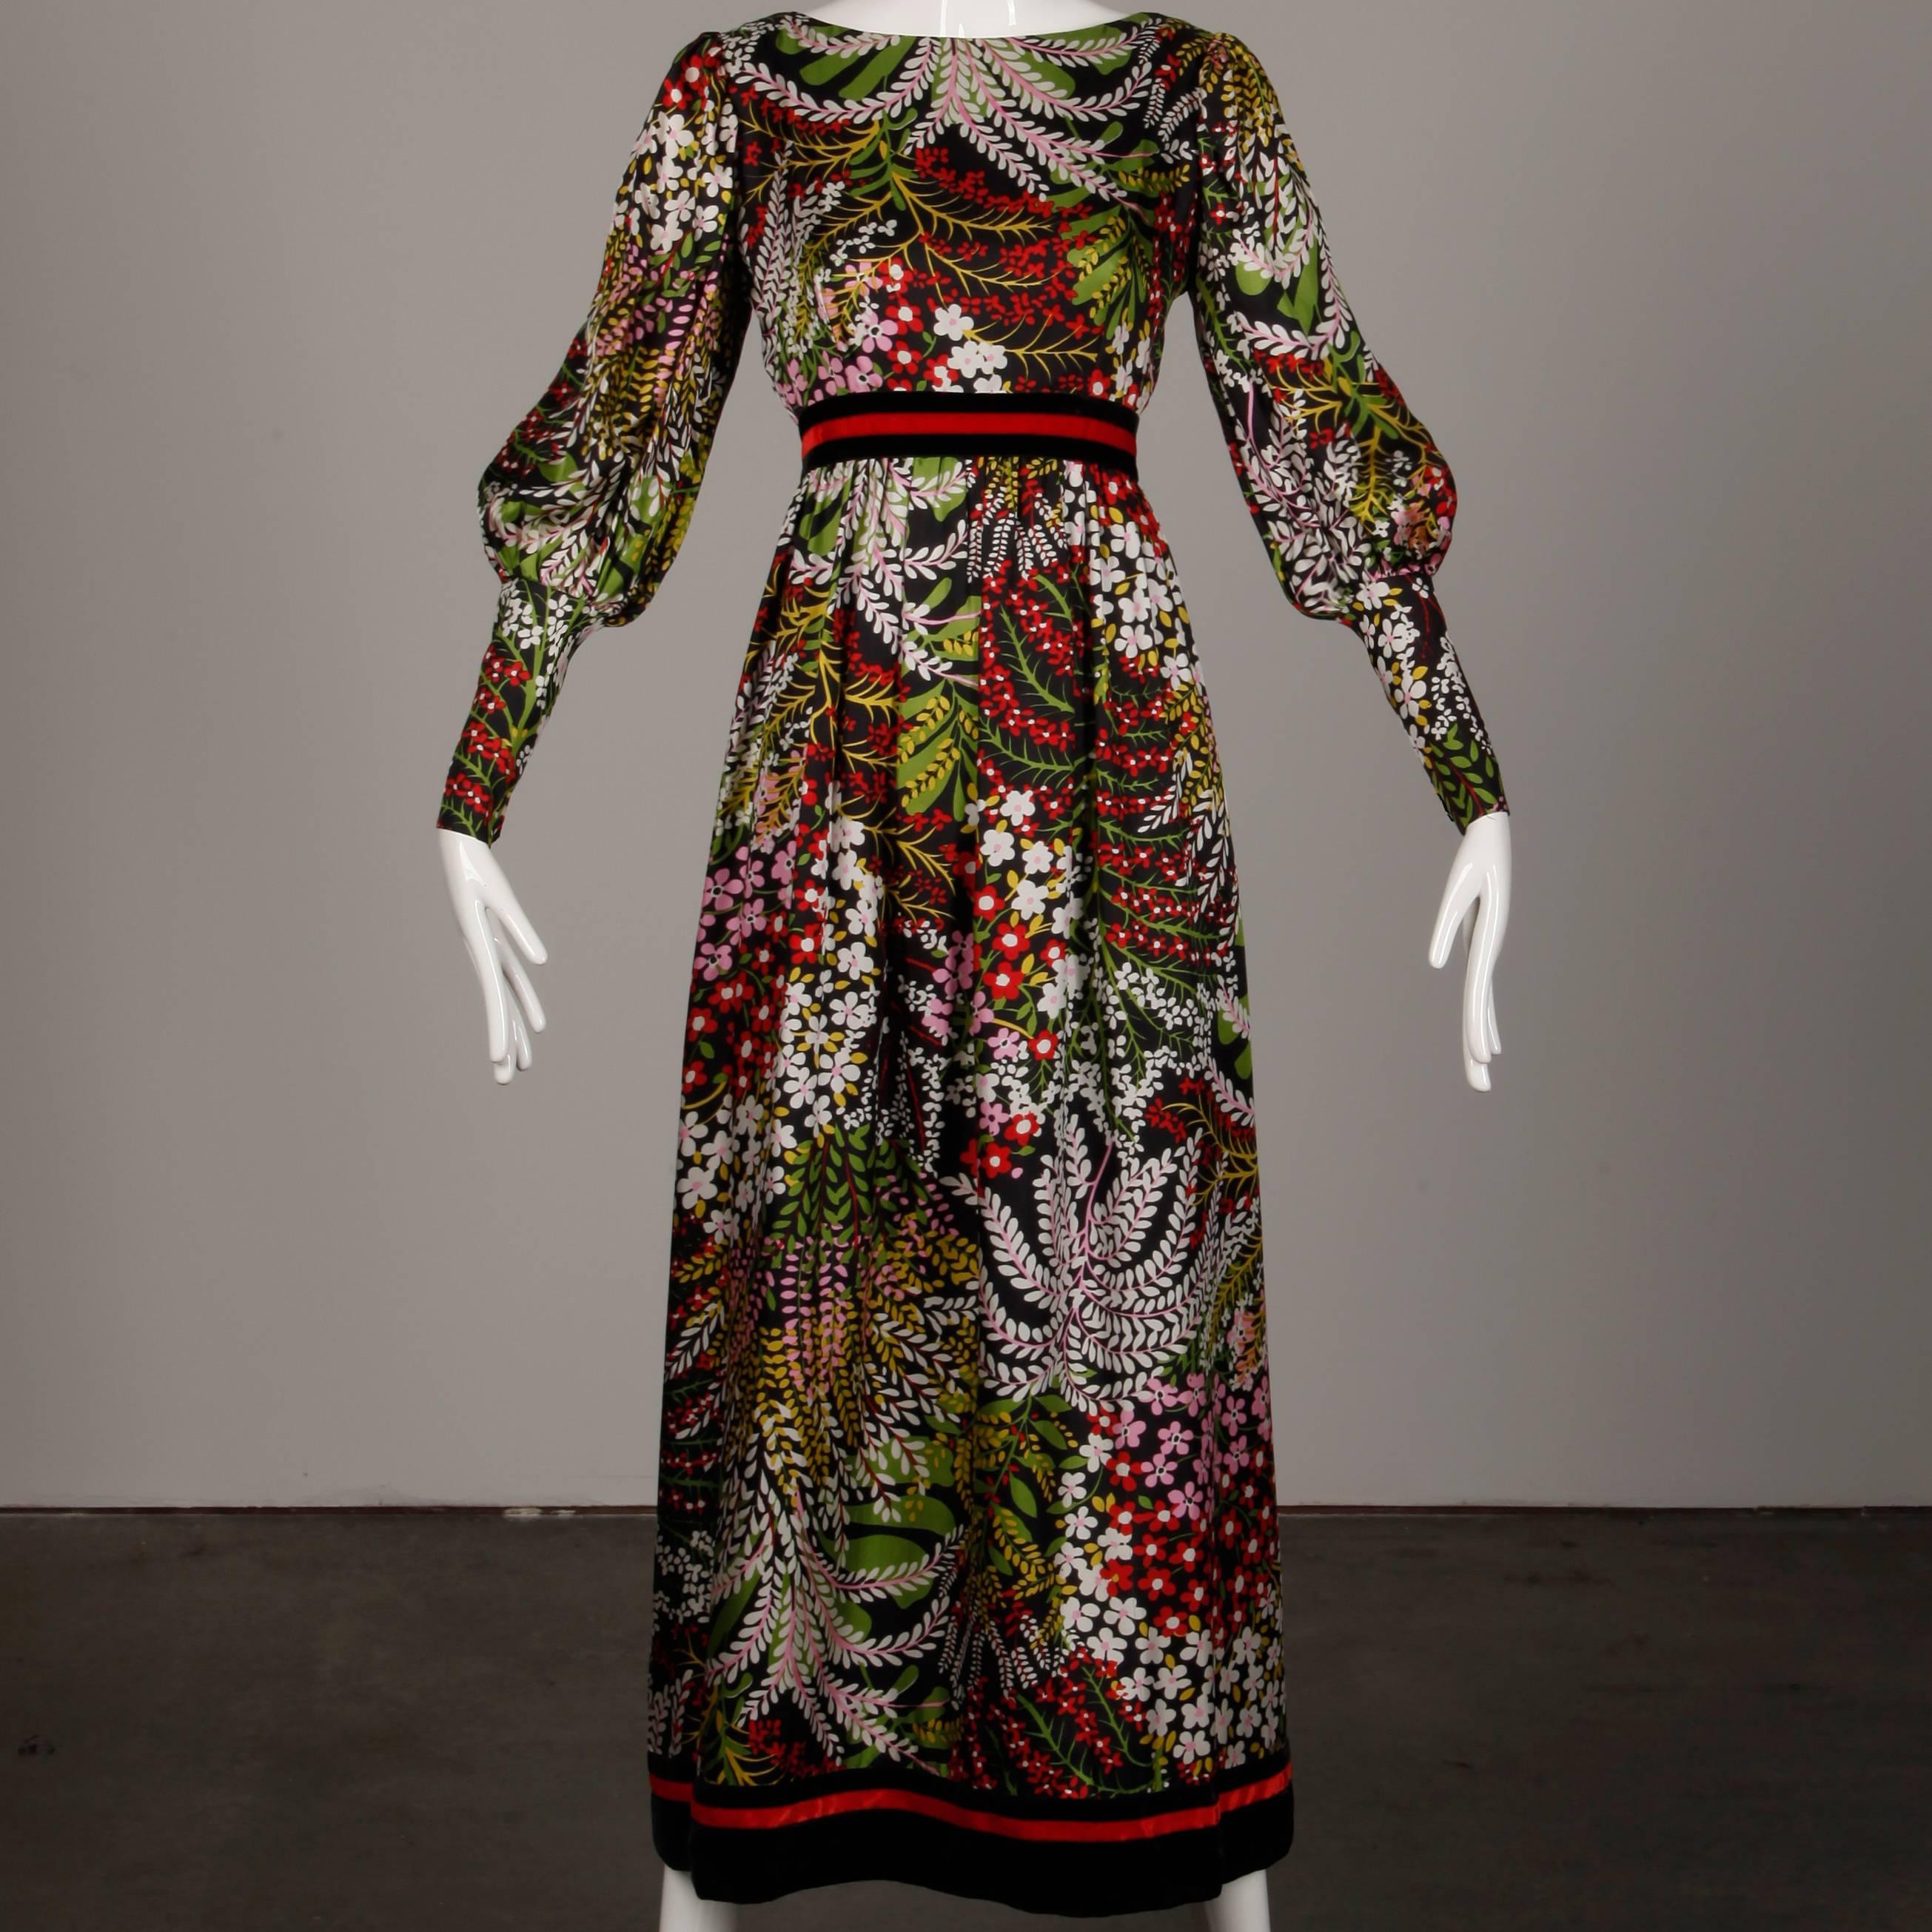 Gorgeous floral printed maxi dress by Mollie Parnis. Full balloon sleeves and velvet empire waistband and bottom hem. 

Fully lined with rear zip and hook closure and snap closure at wrists. 100% silk. The bust measures 34